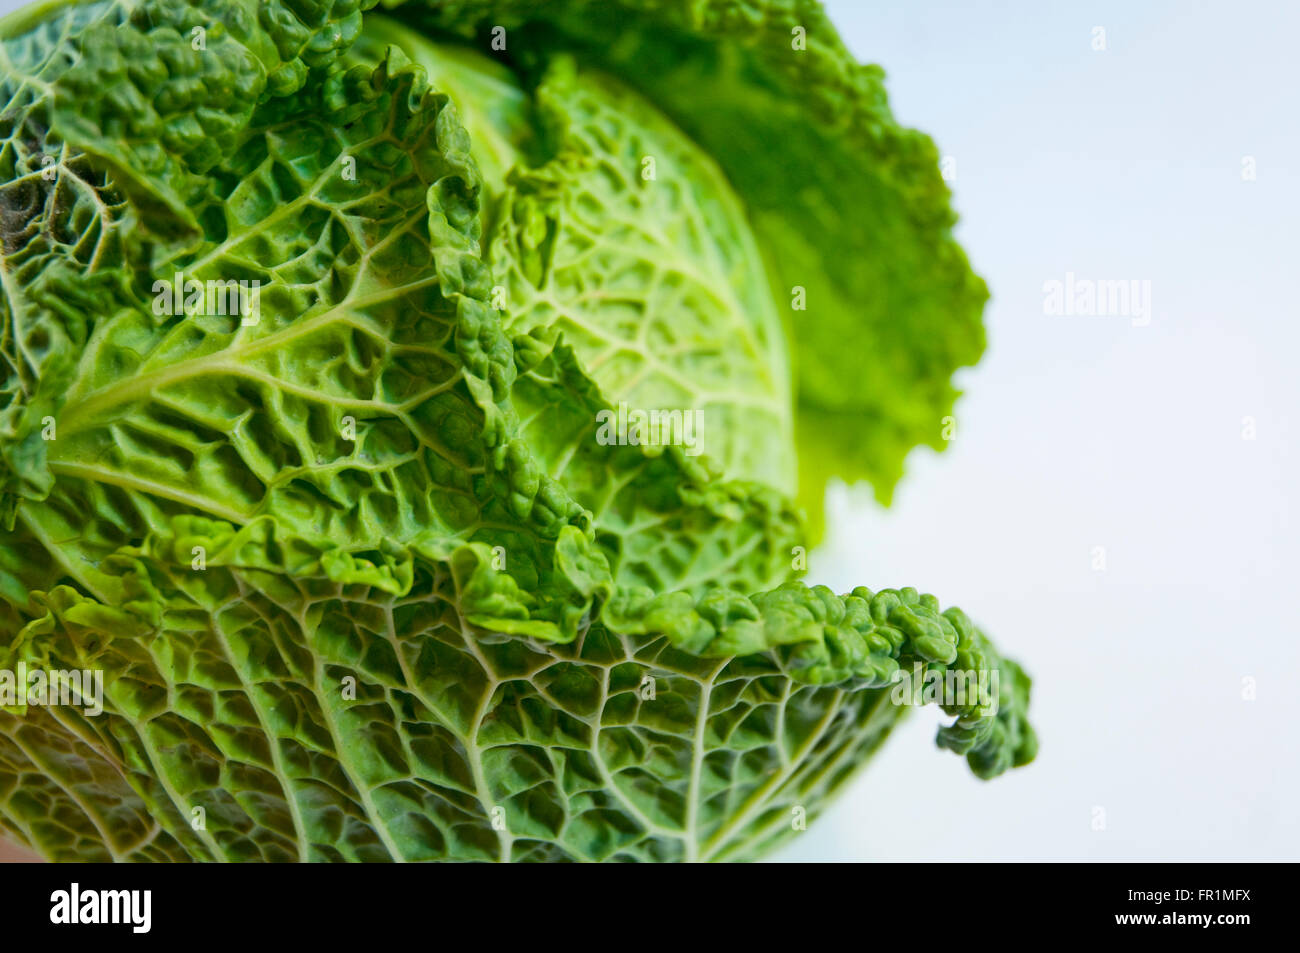 Cabbage, close view. Stock Photo